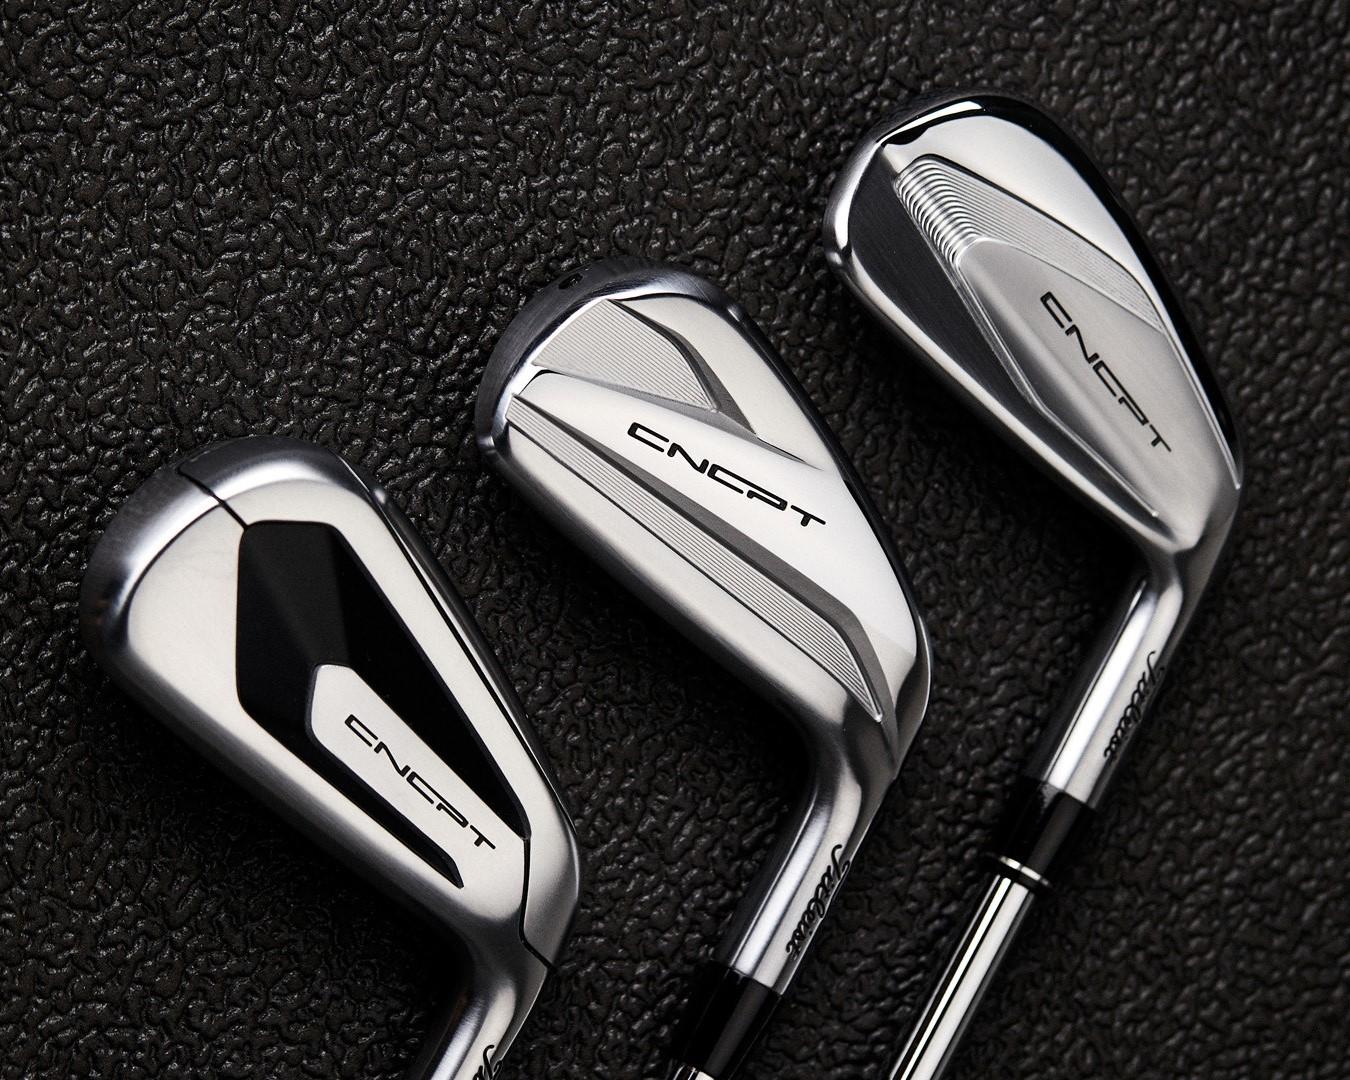 Titleist introduce new CNCPT irons constructed from exotic high